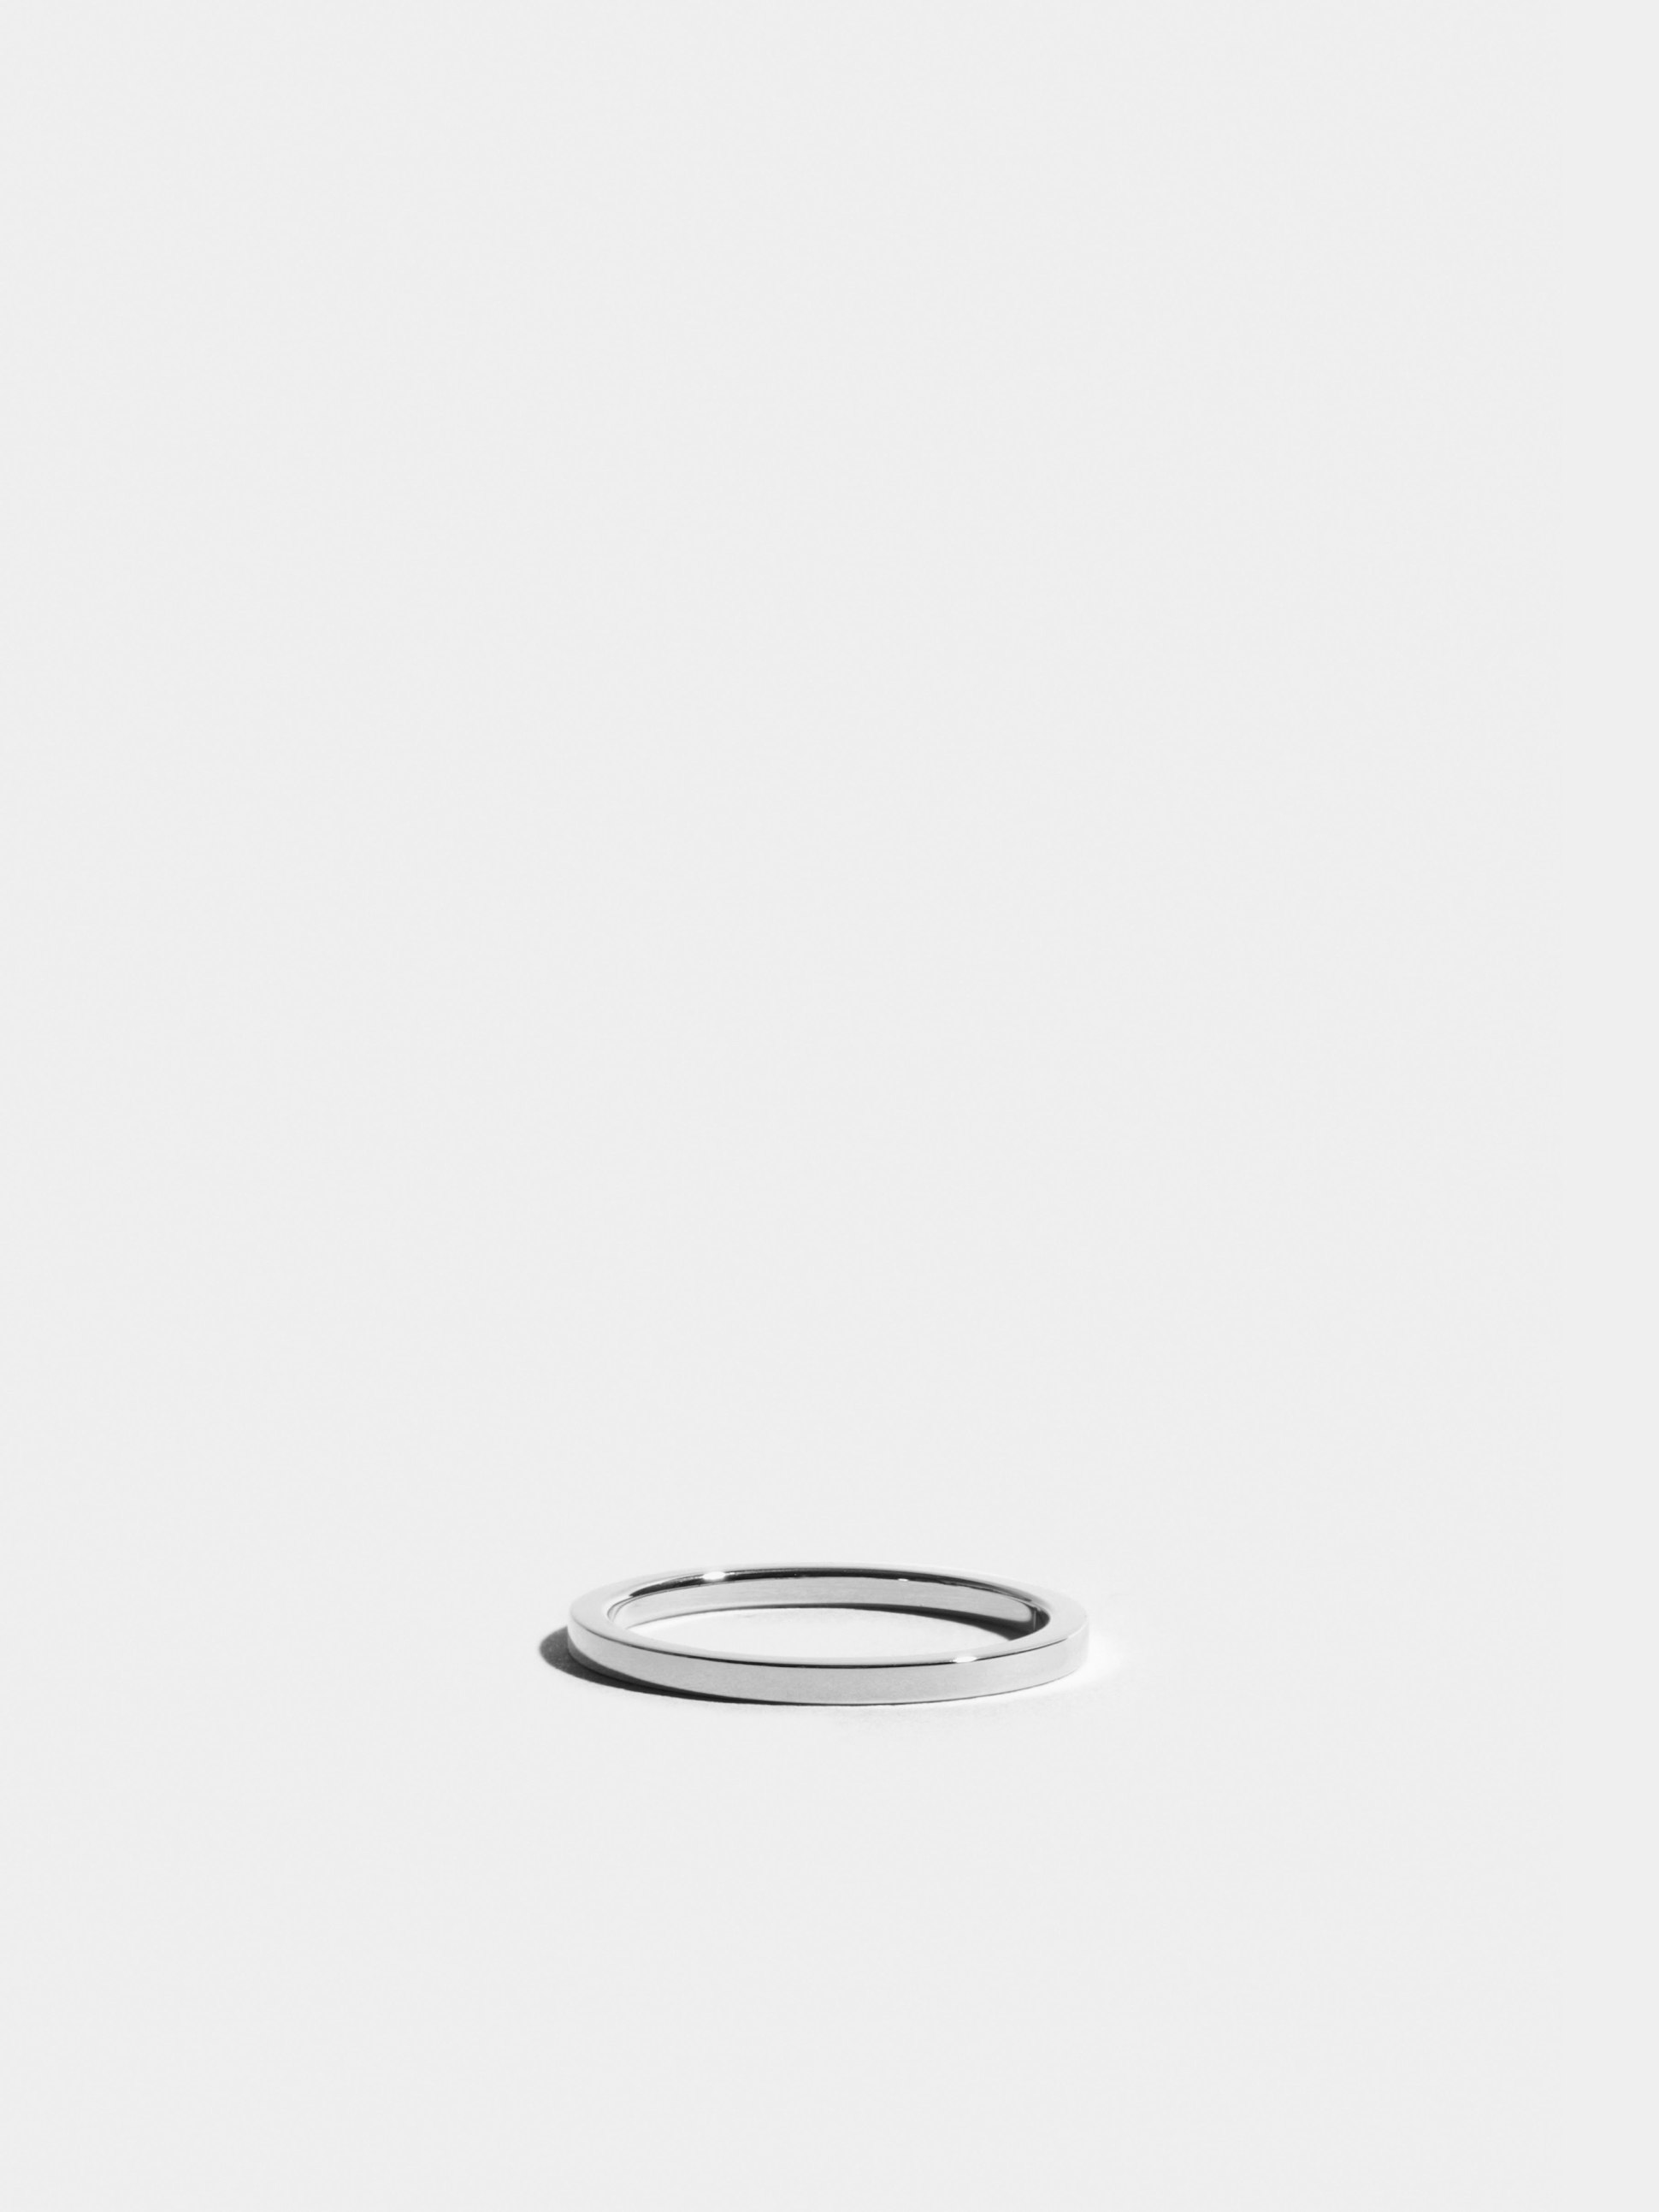 Anagramme flat ribbon ring in 18k Fairmined ethical white gold